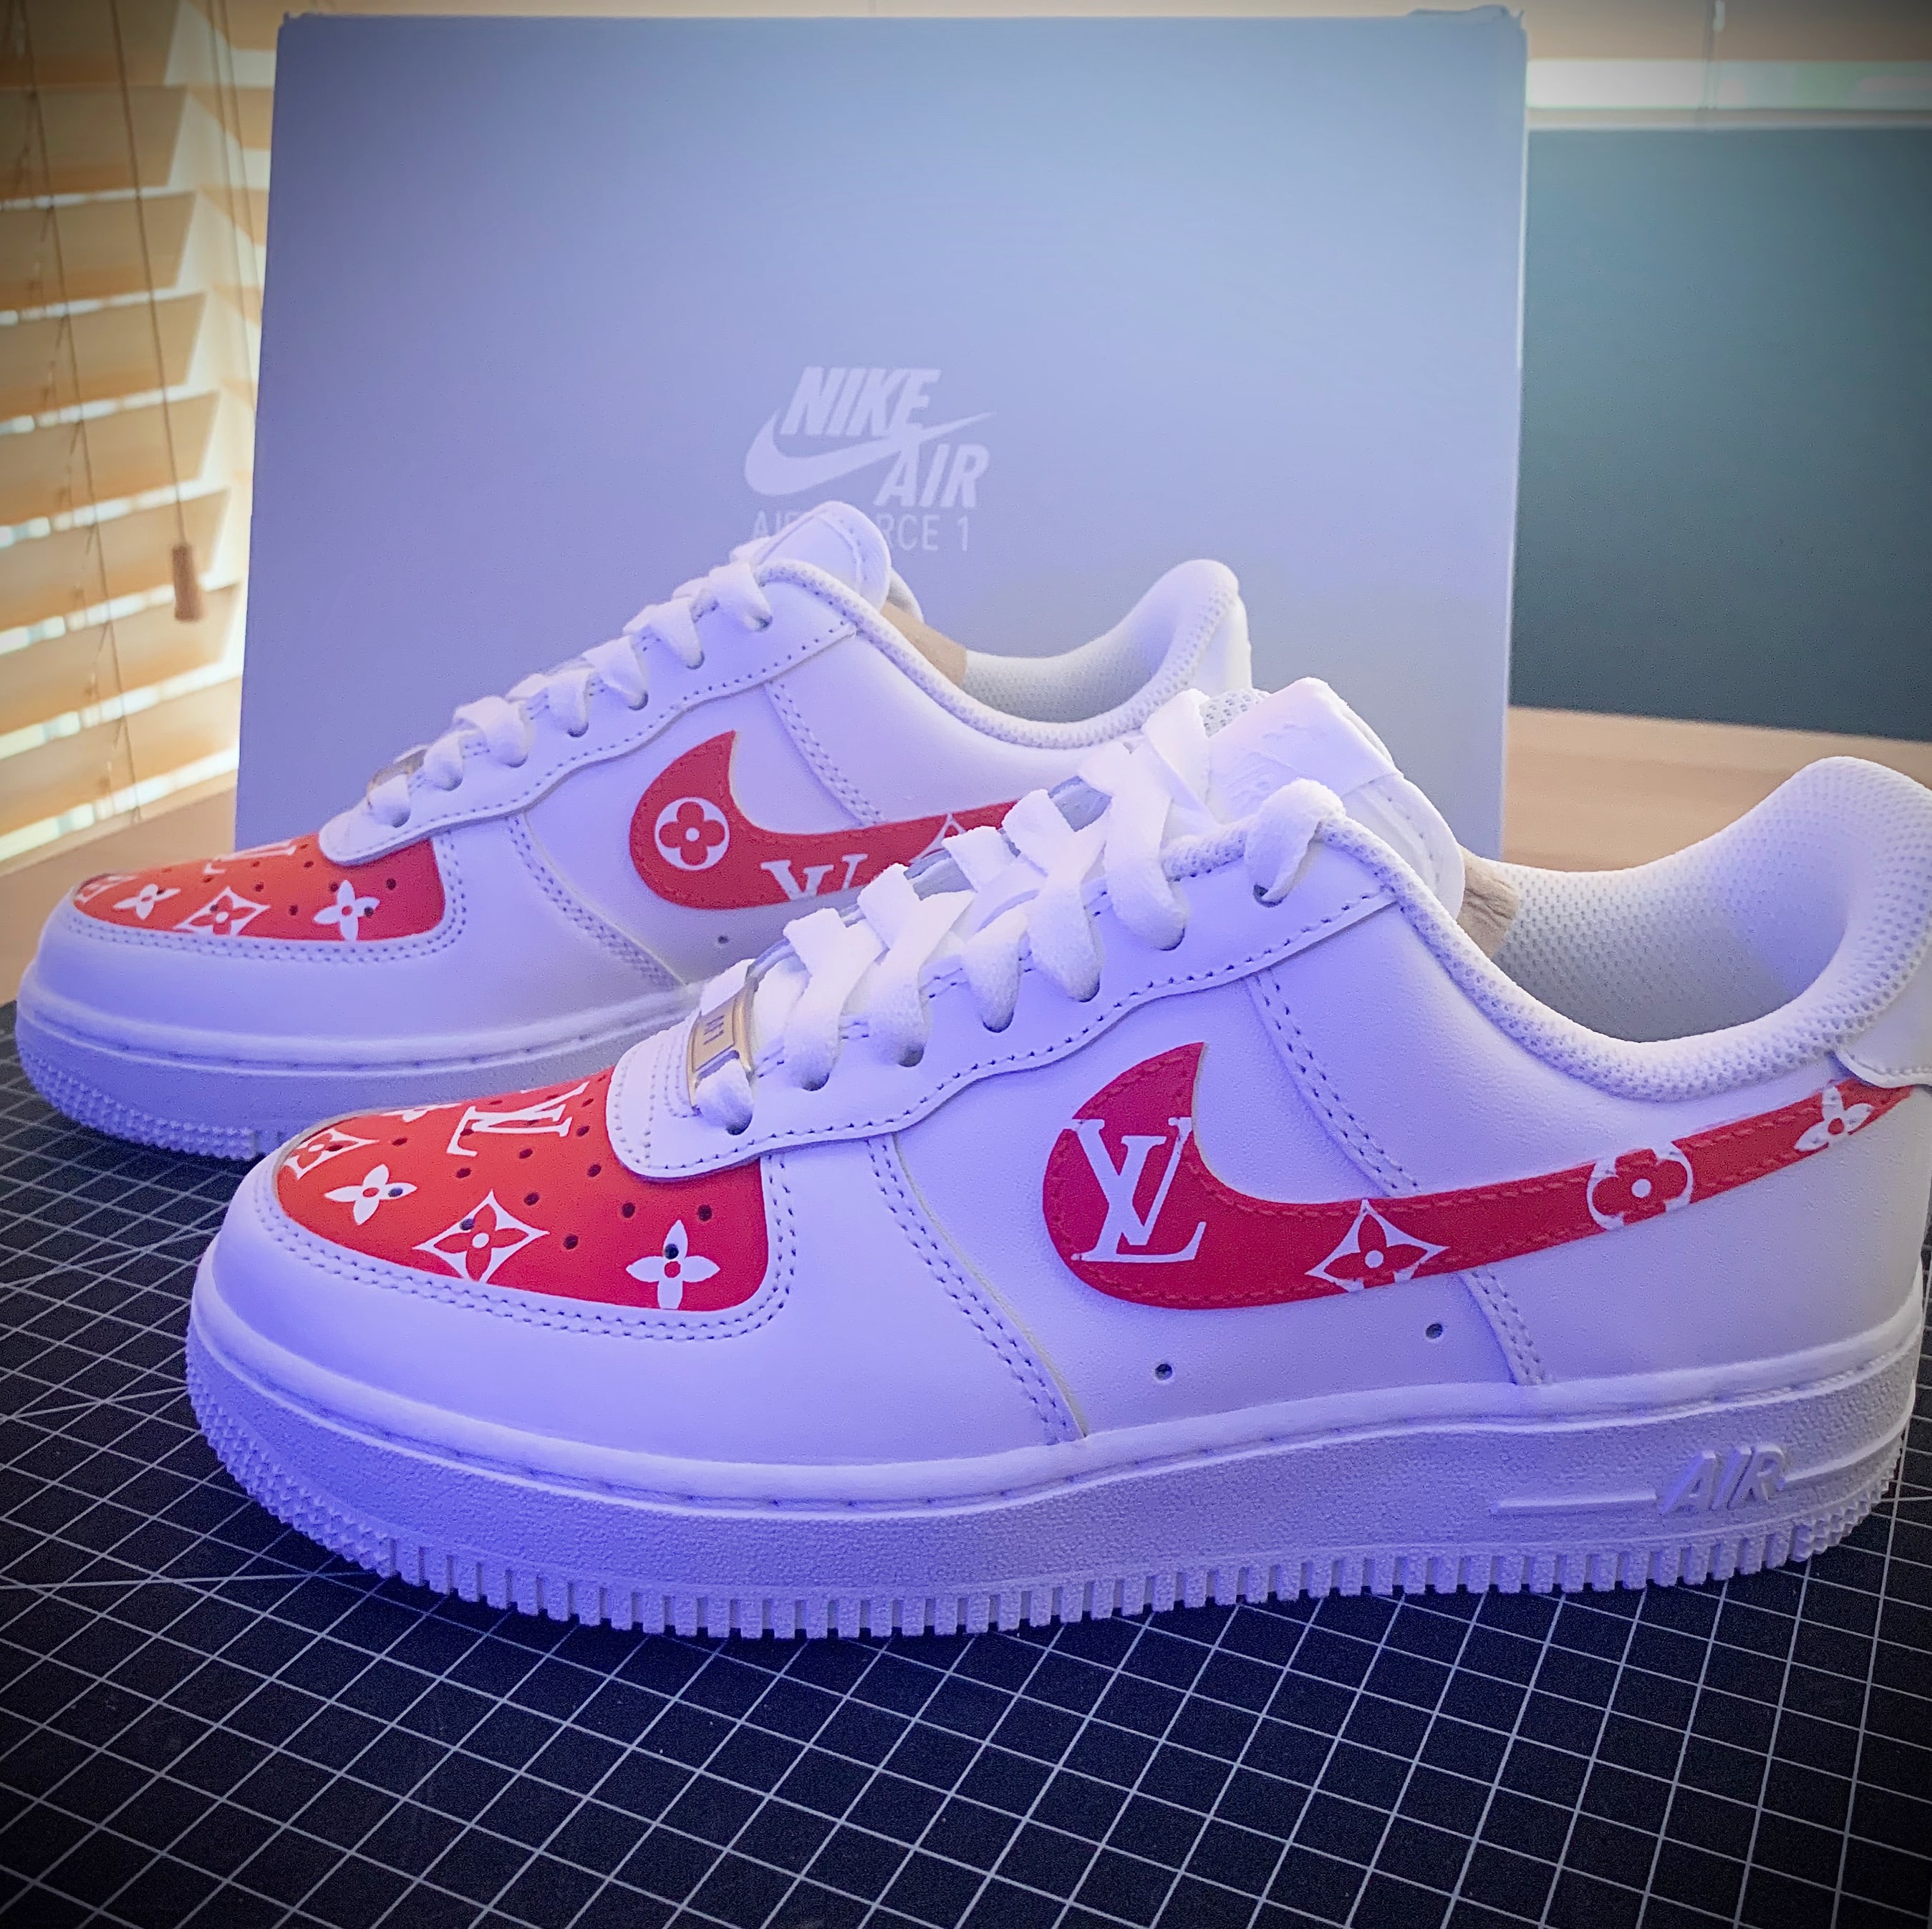 Customise a brand new pair of air force 